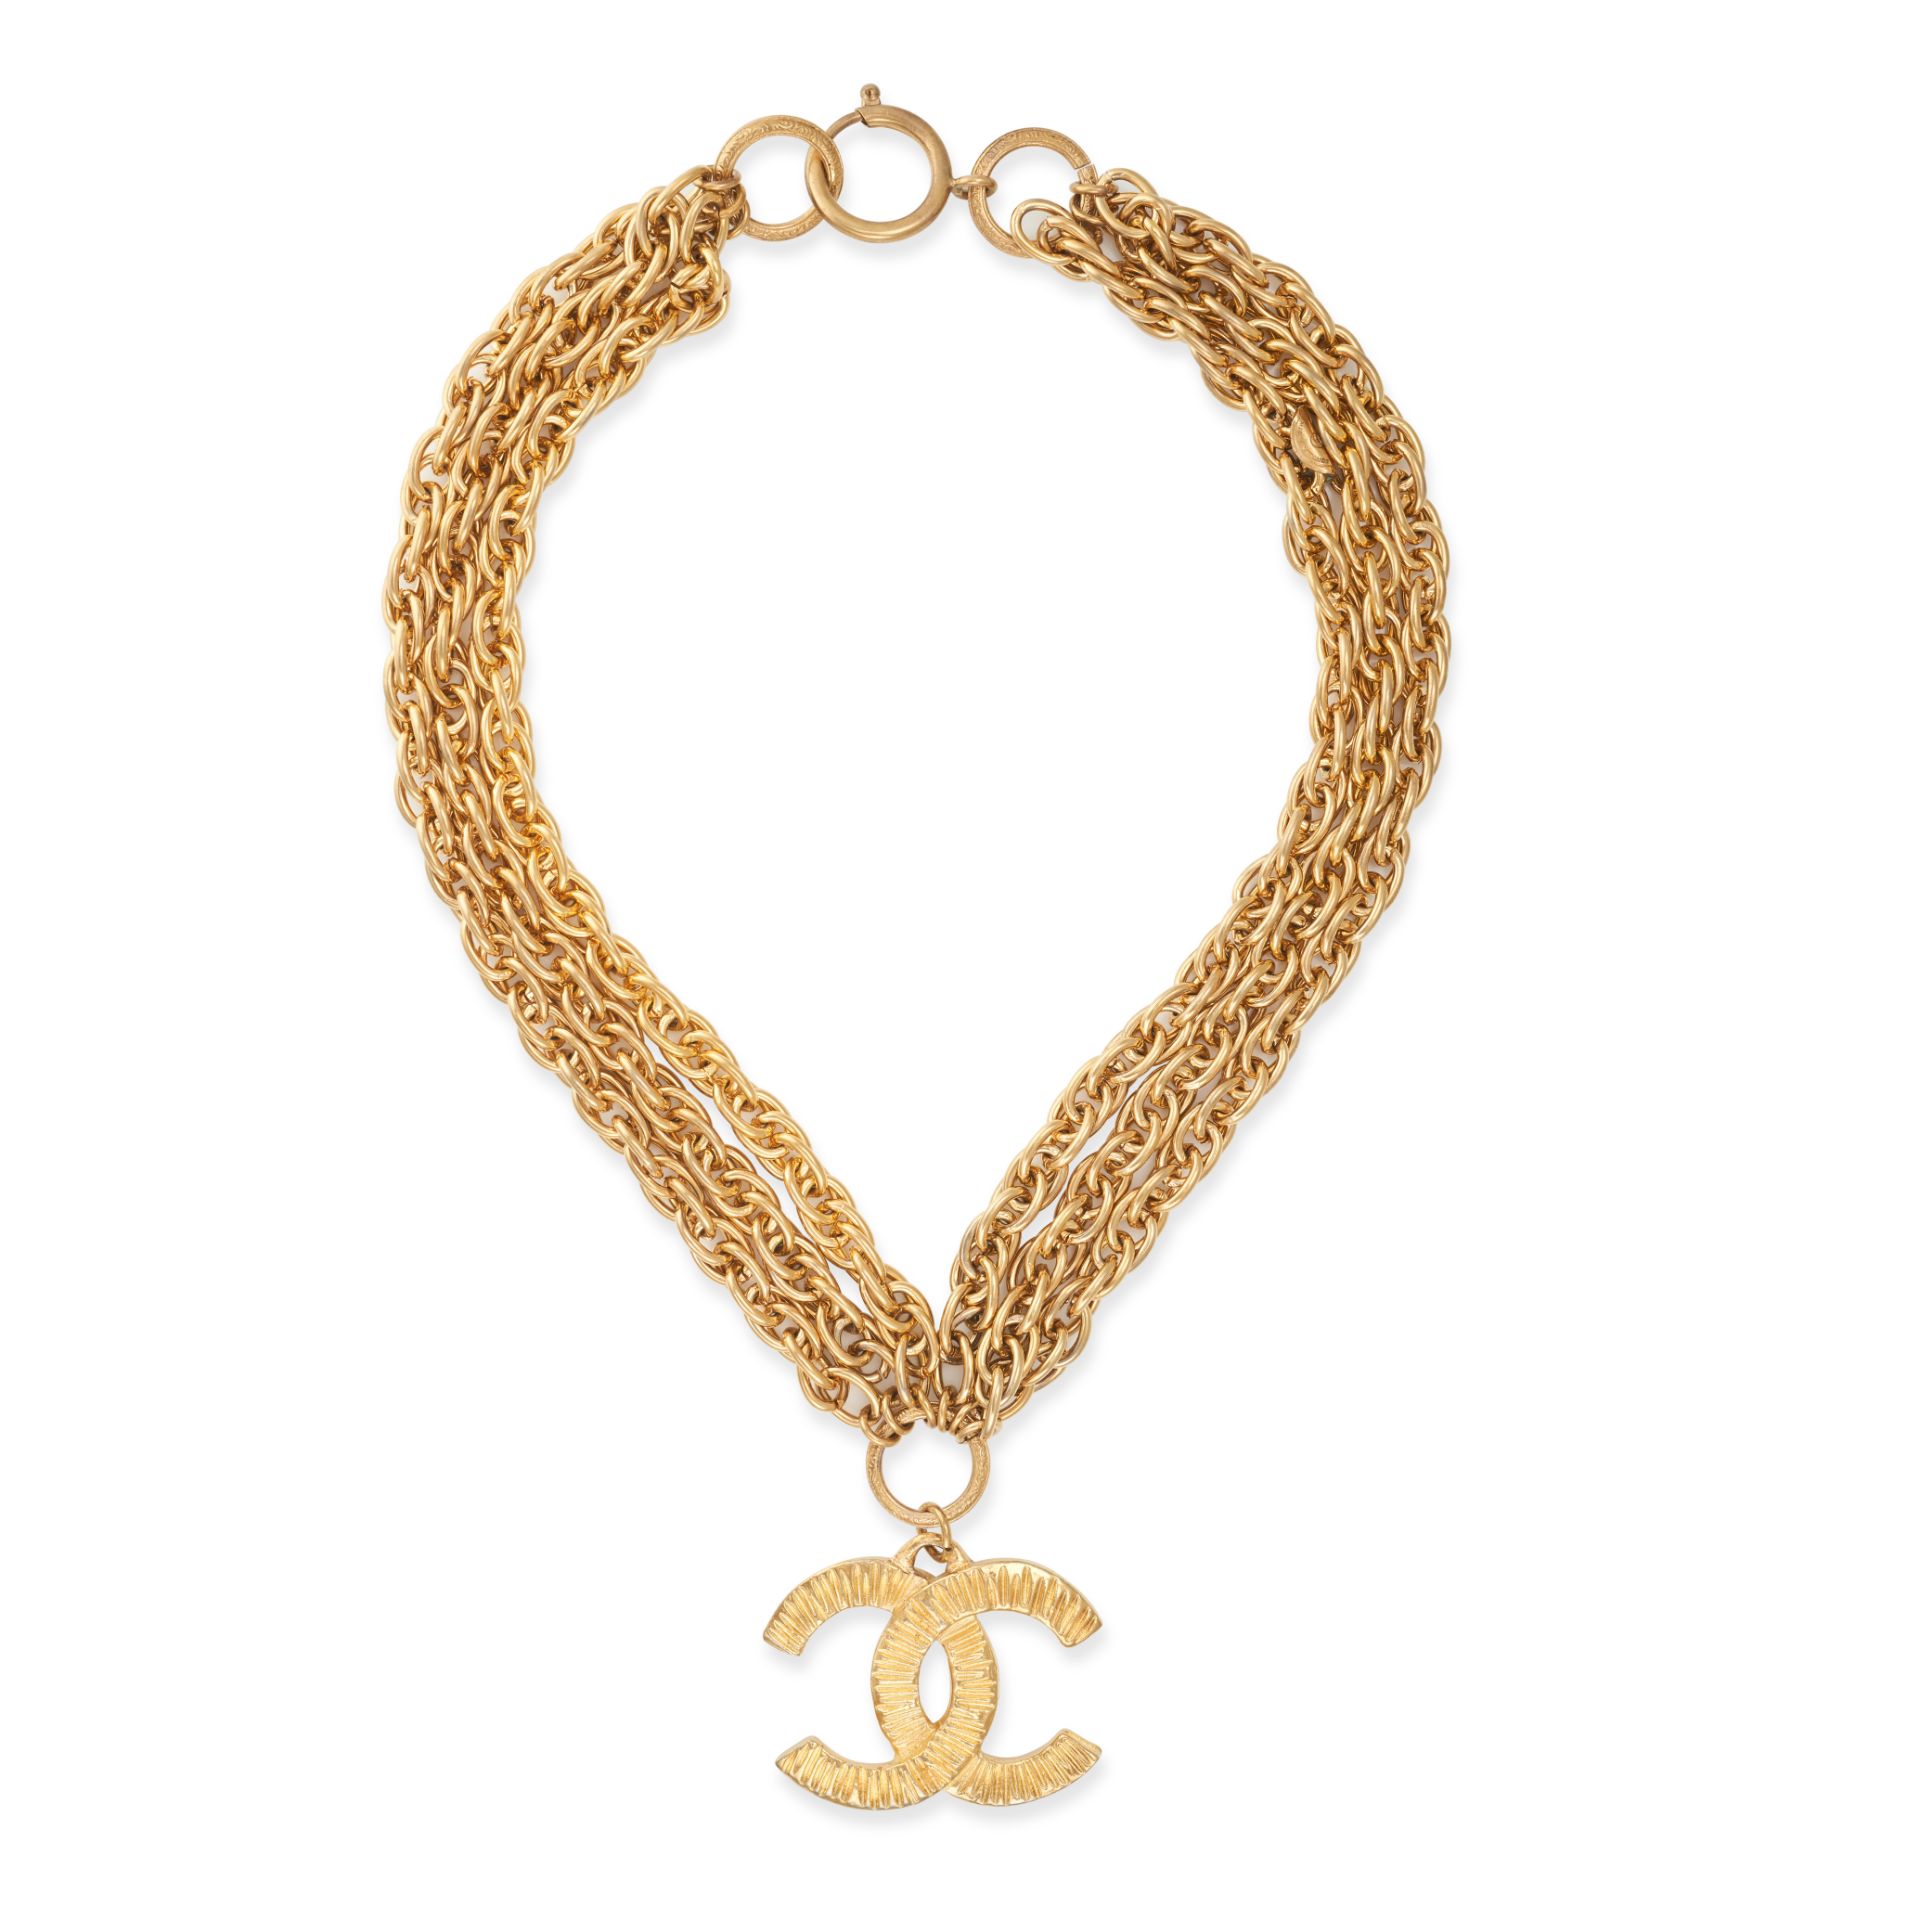 CHANEL VINTAGE PENDANT AND CHAIN